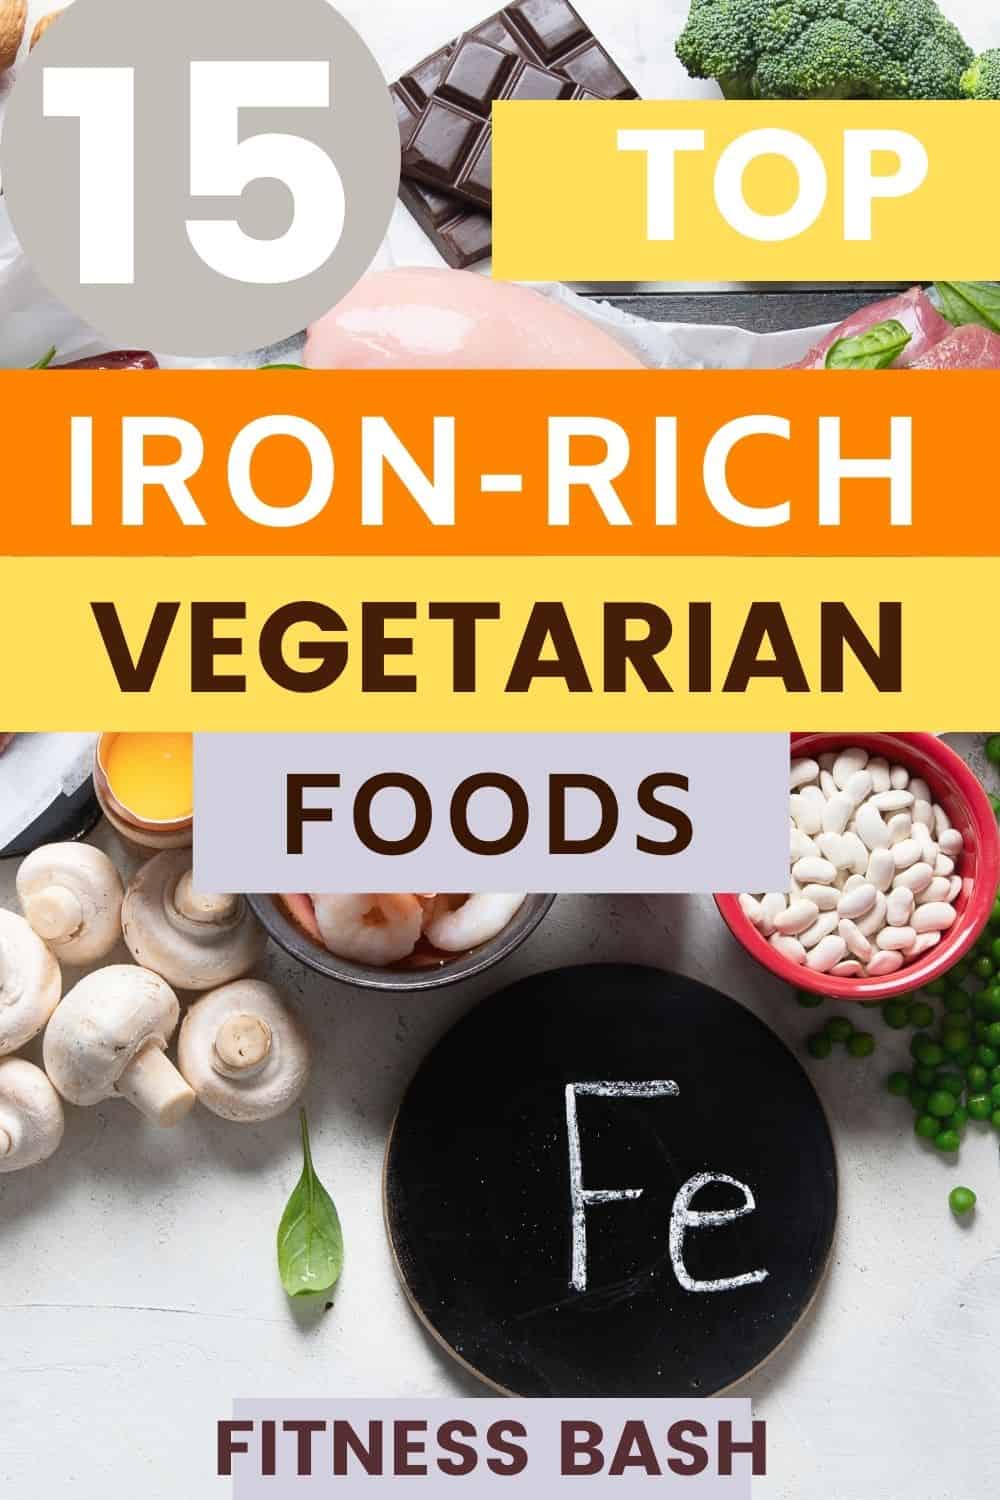 iron-rich foods for vegetarians